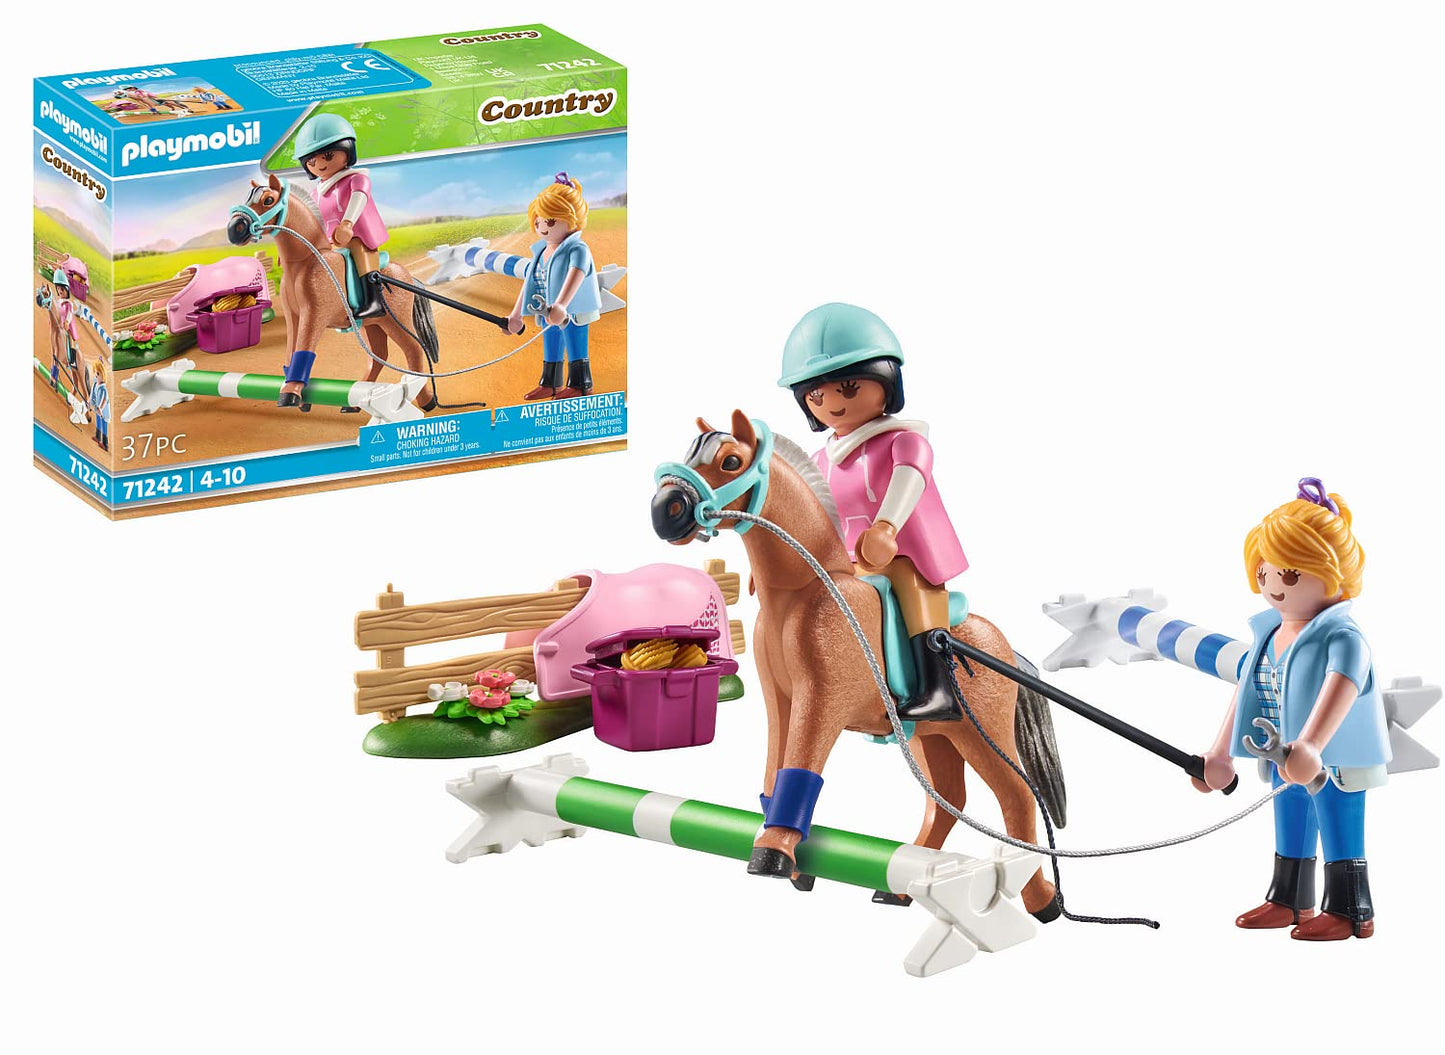 Riding Lessons Playmobil Country 71242